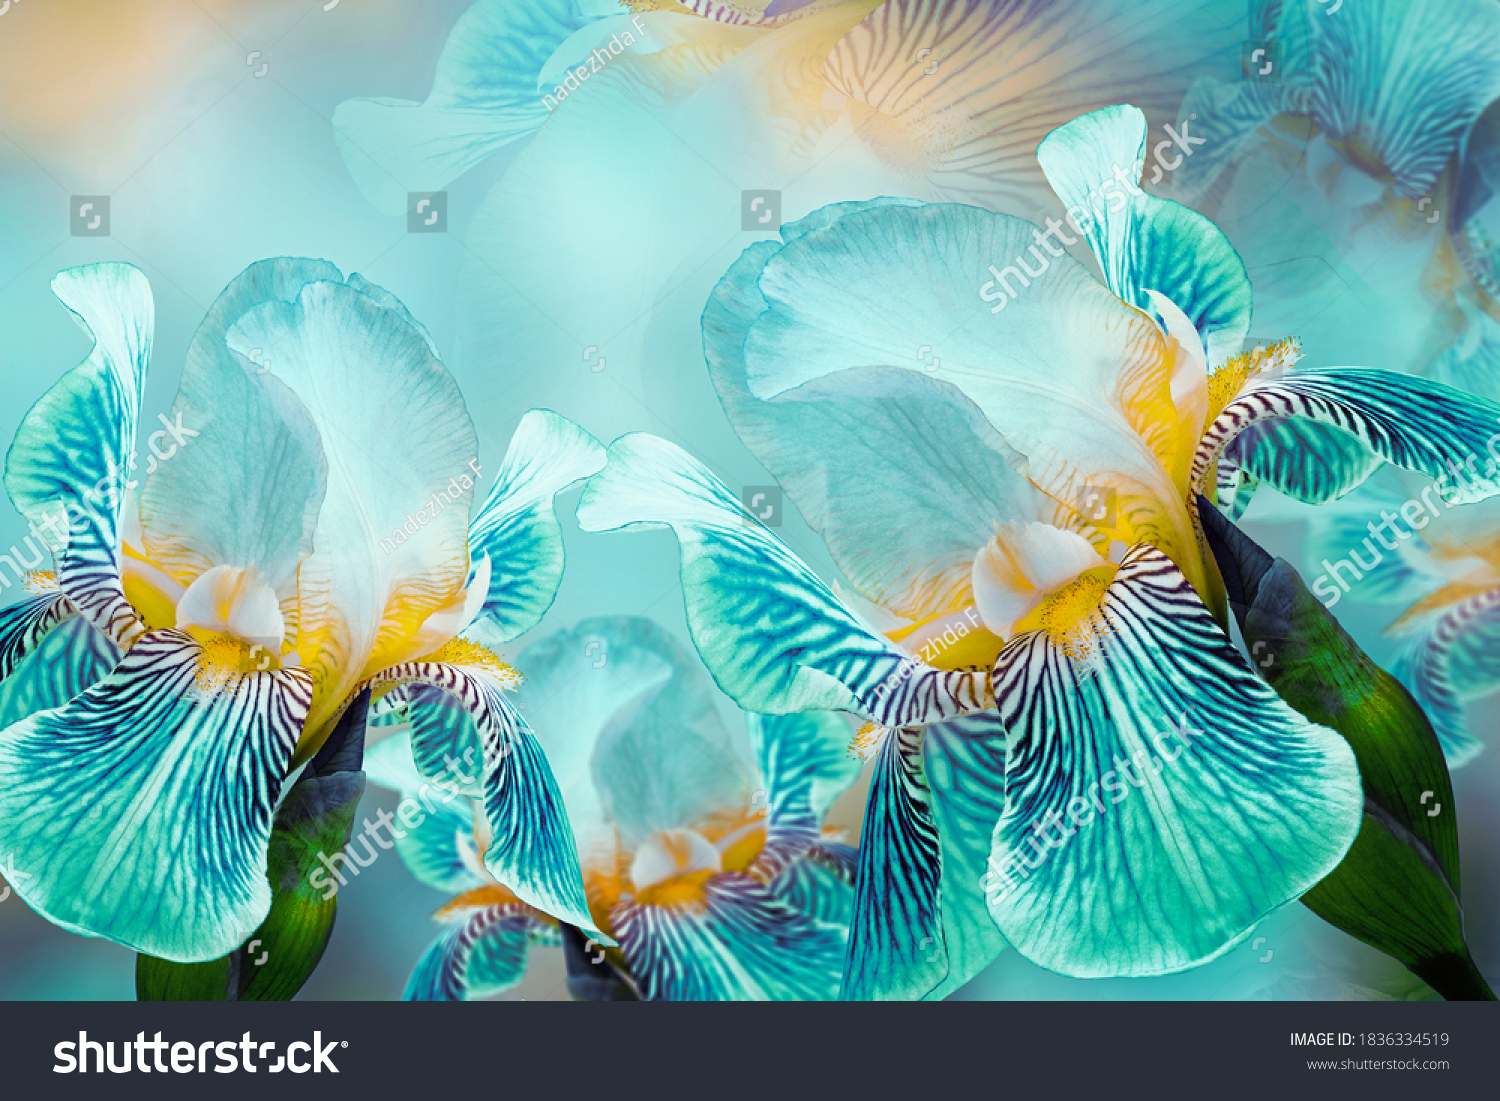 Spring bouquet of turquoise irises flowers on a sunny white-turquoise background. Close-up.Greeting card. Nature. #1836334519